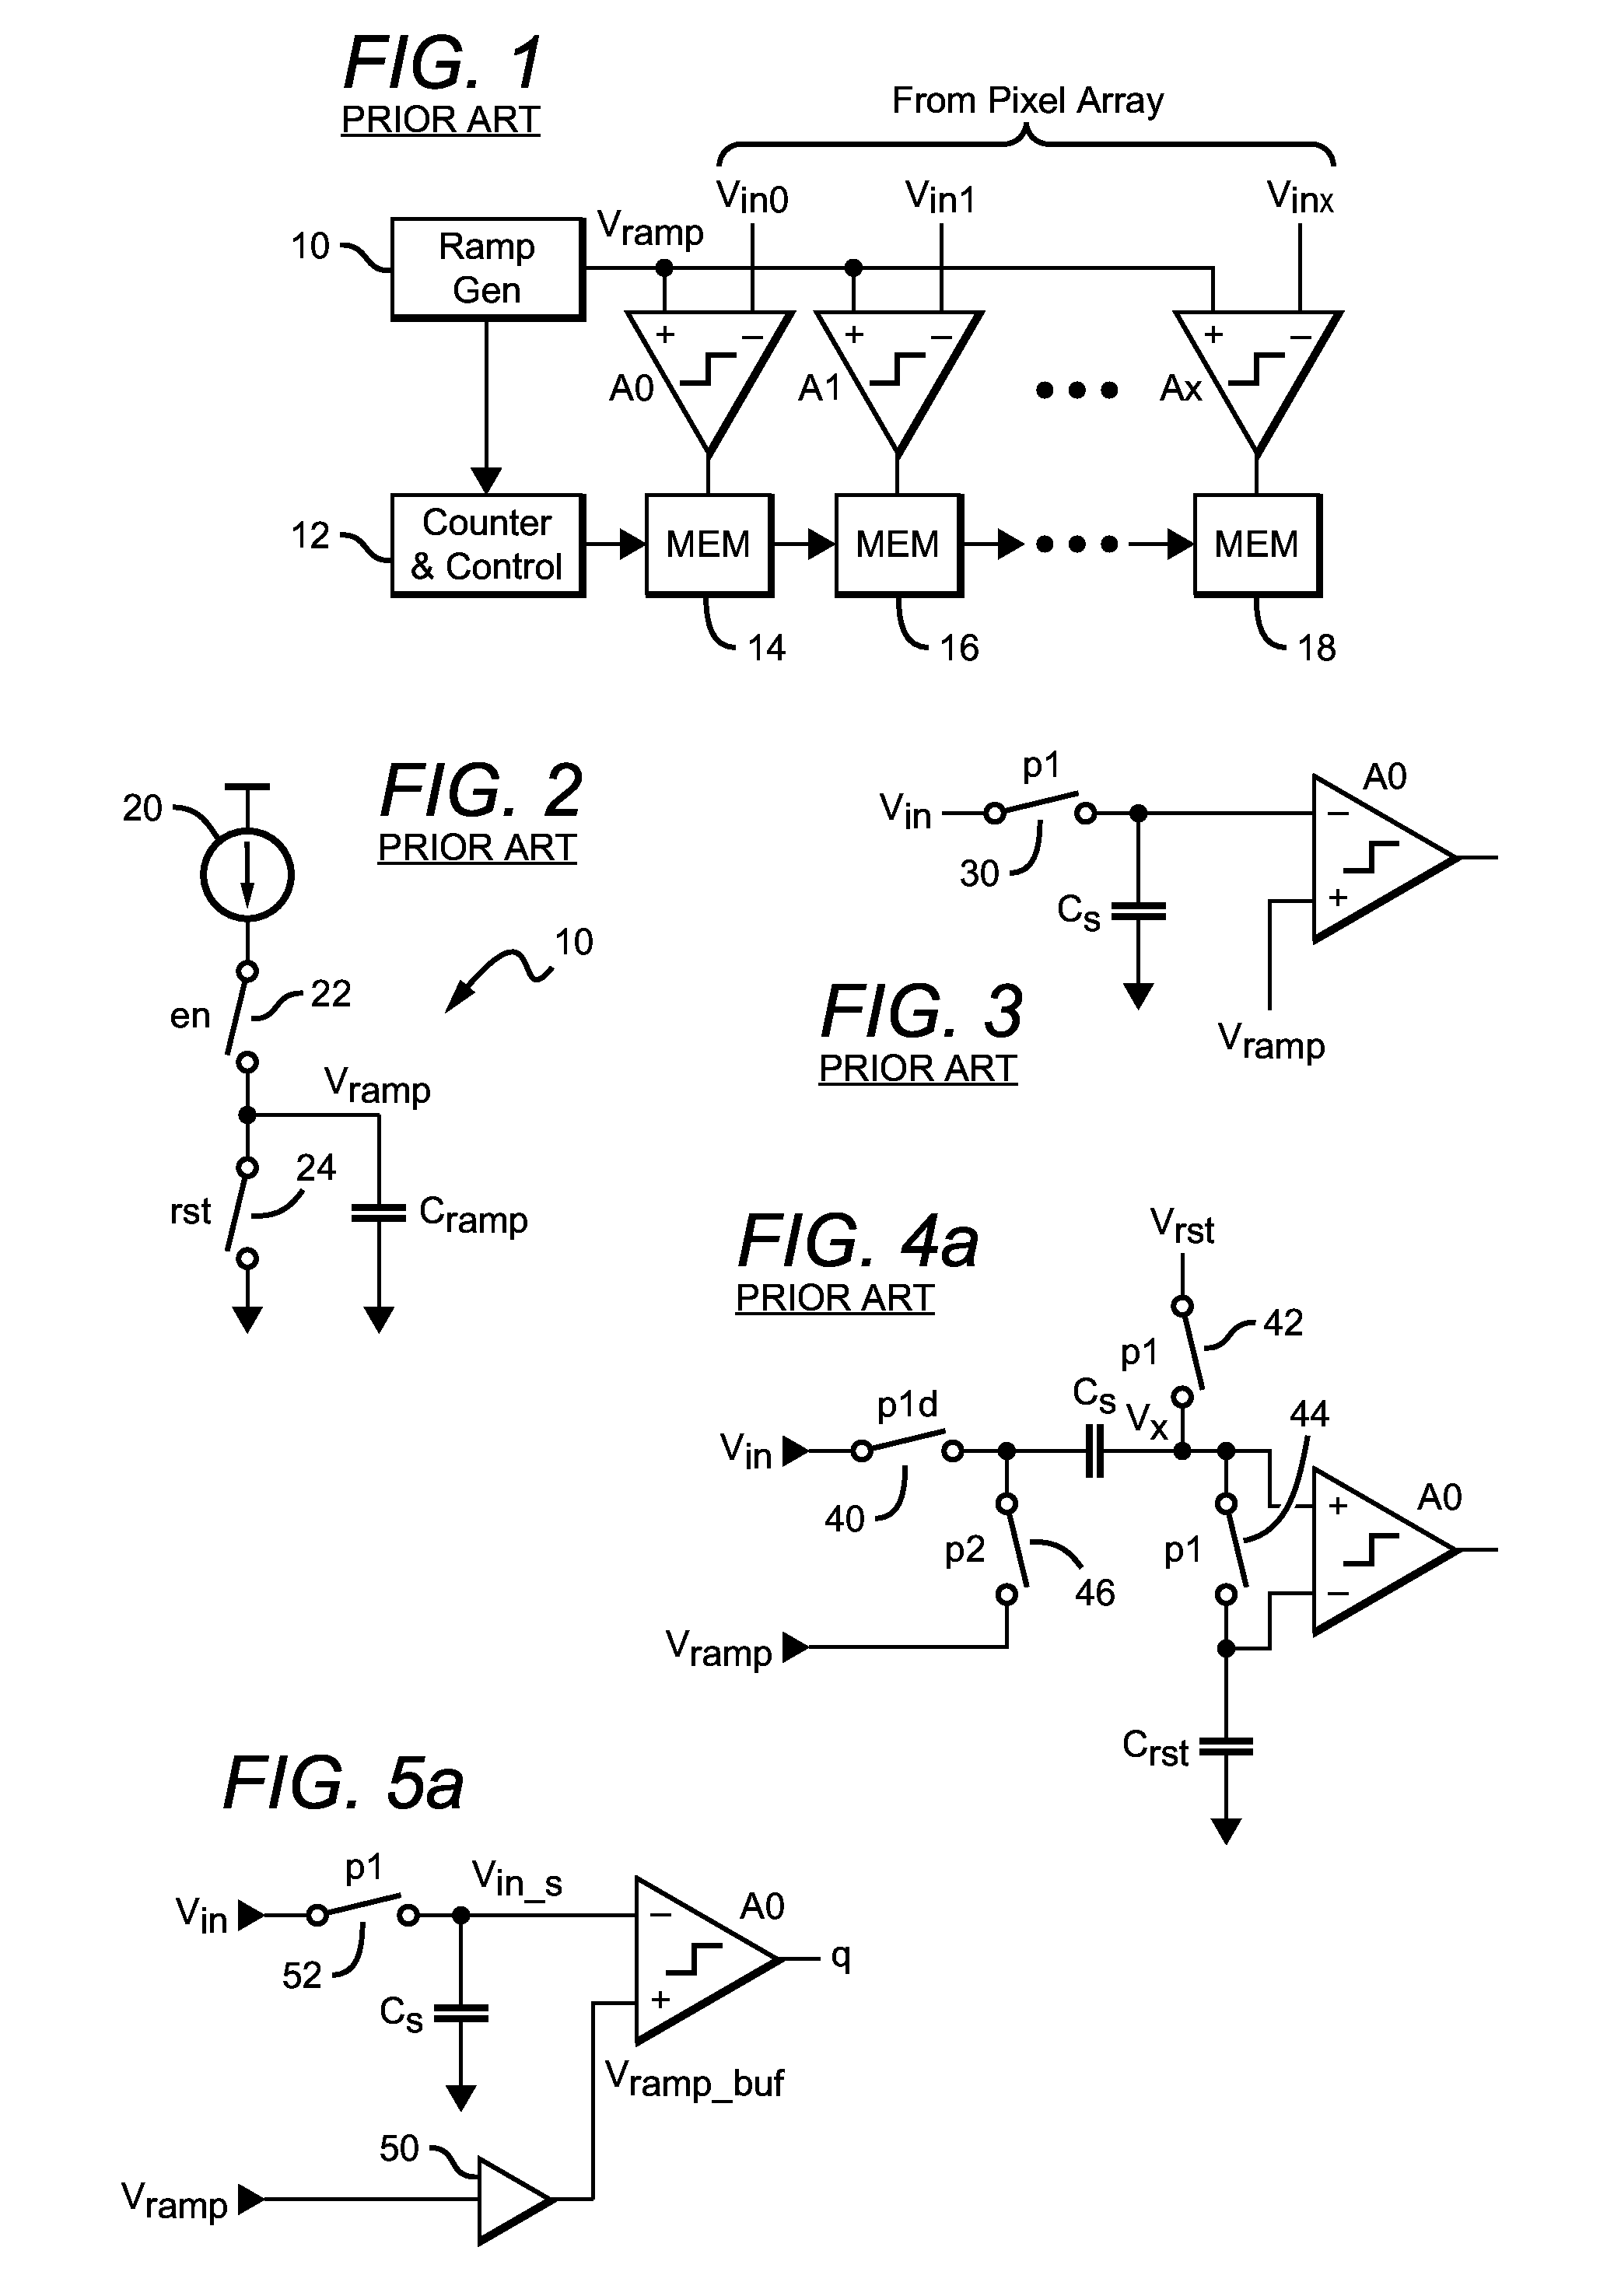 Comparator circuits with local ramp buffering for a column-parallel single-slope ADC